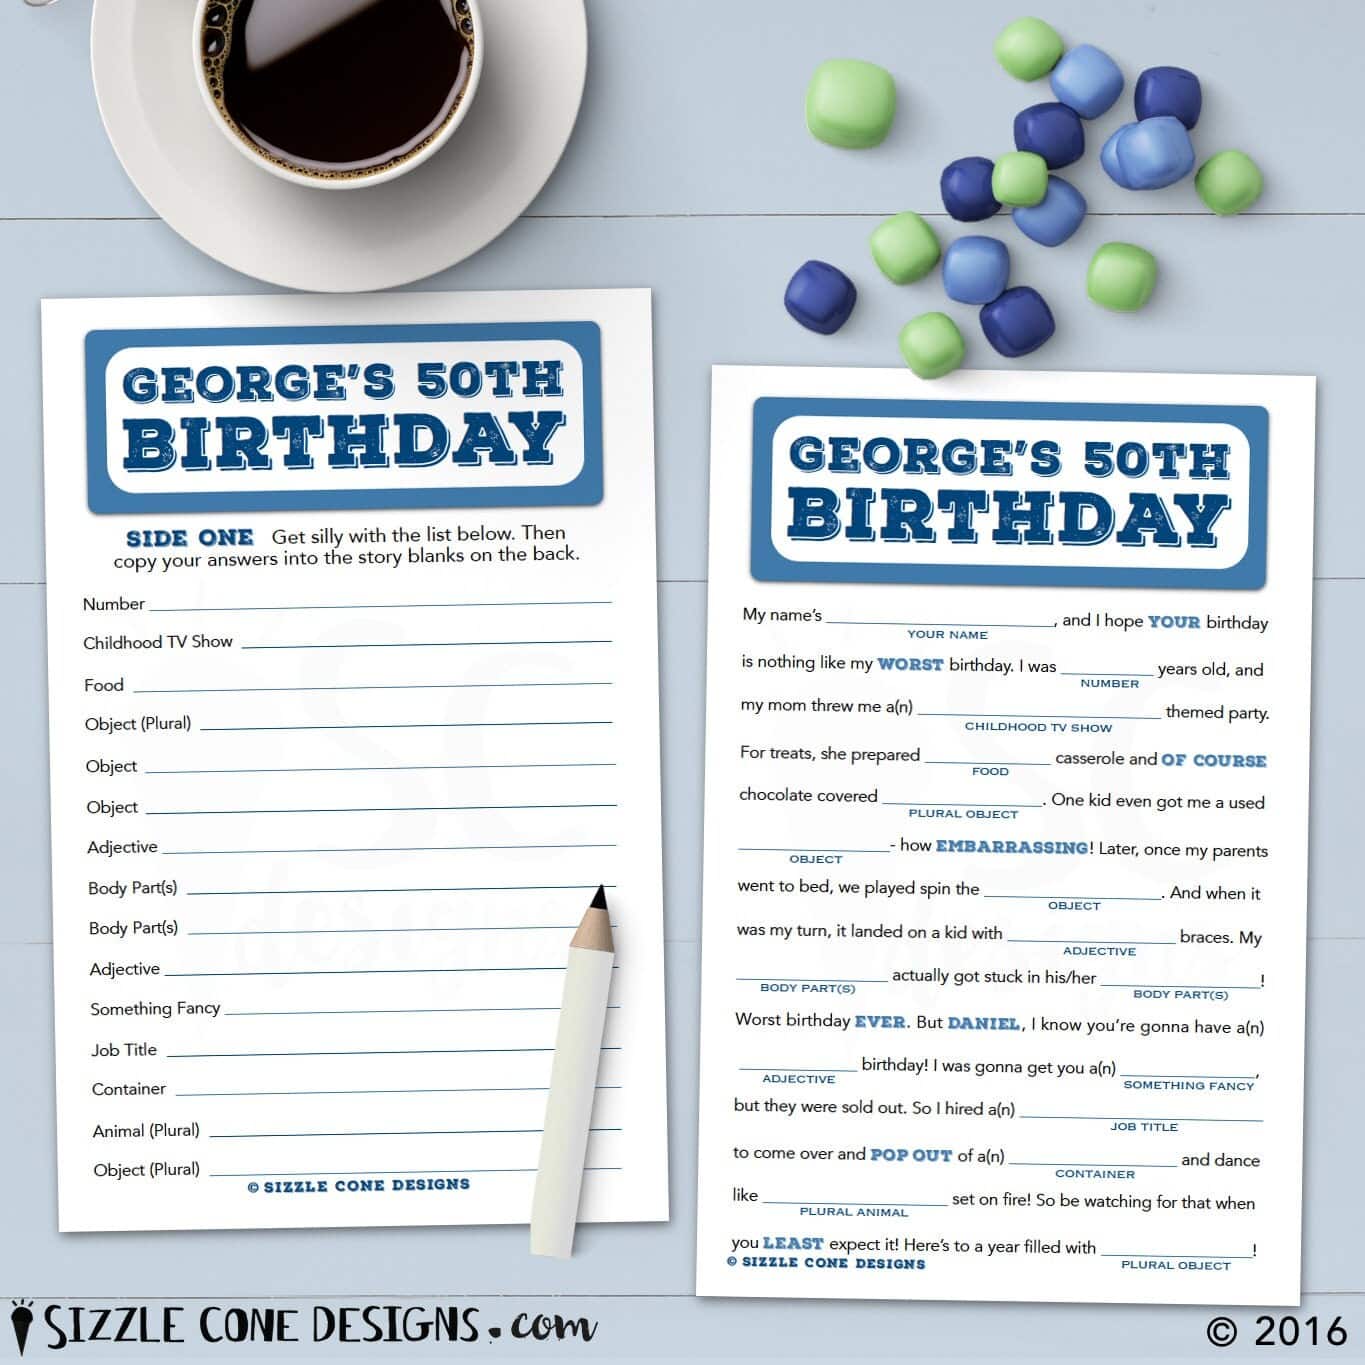 Personalized Adult Birthday Mad Lib Party Game Printable OR